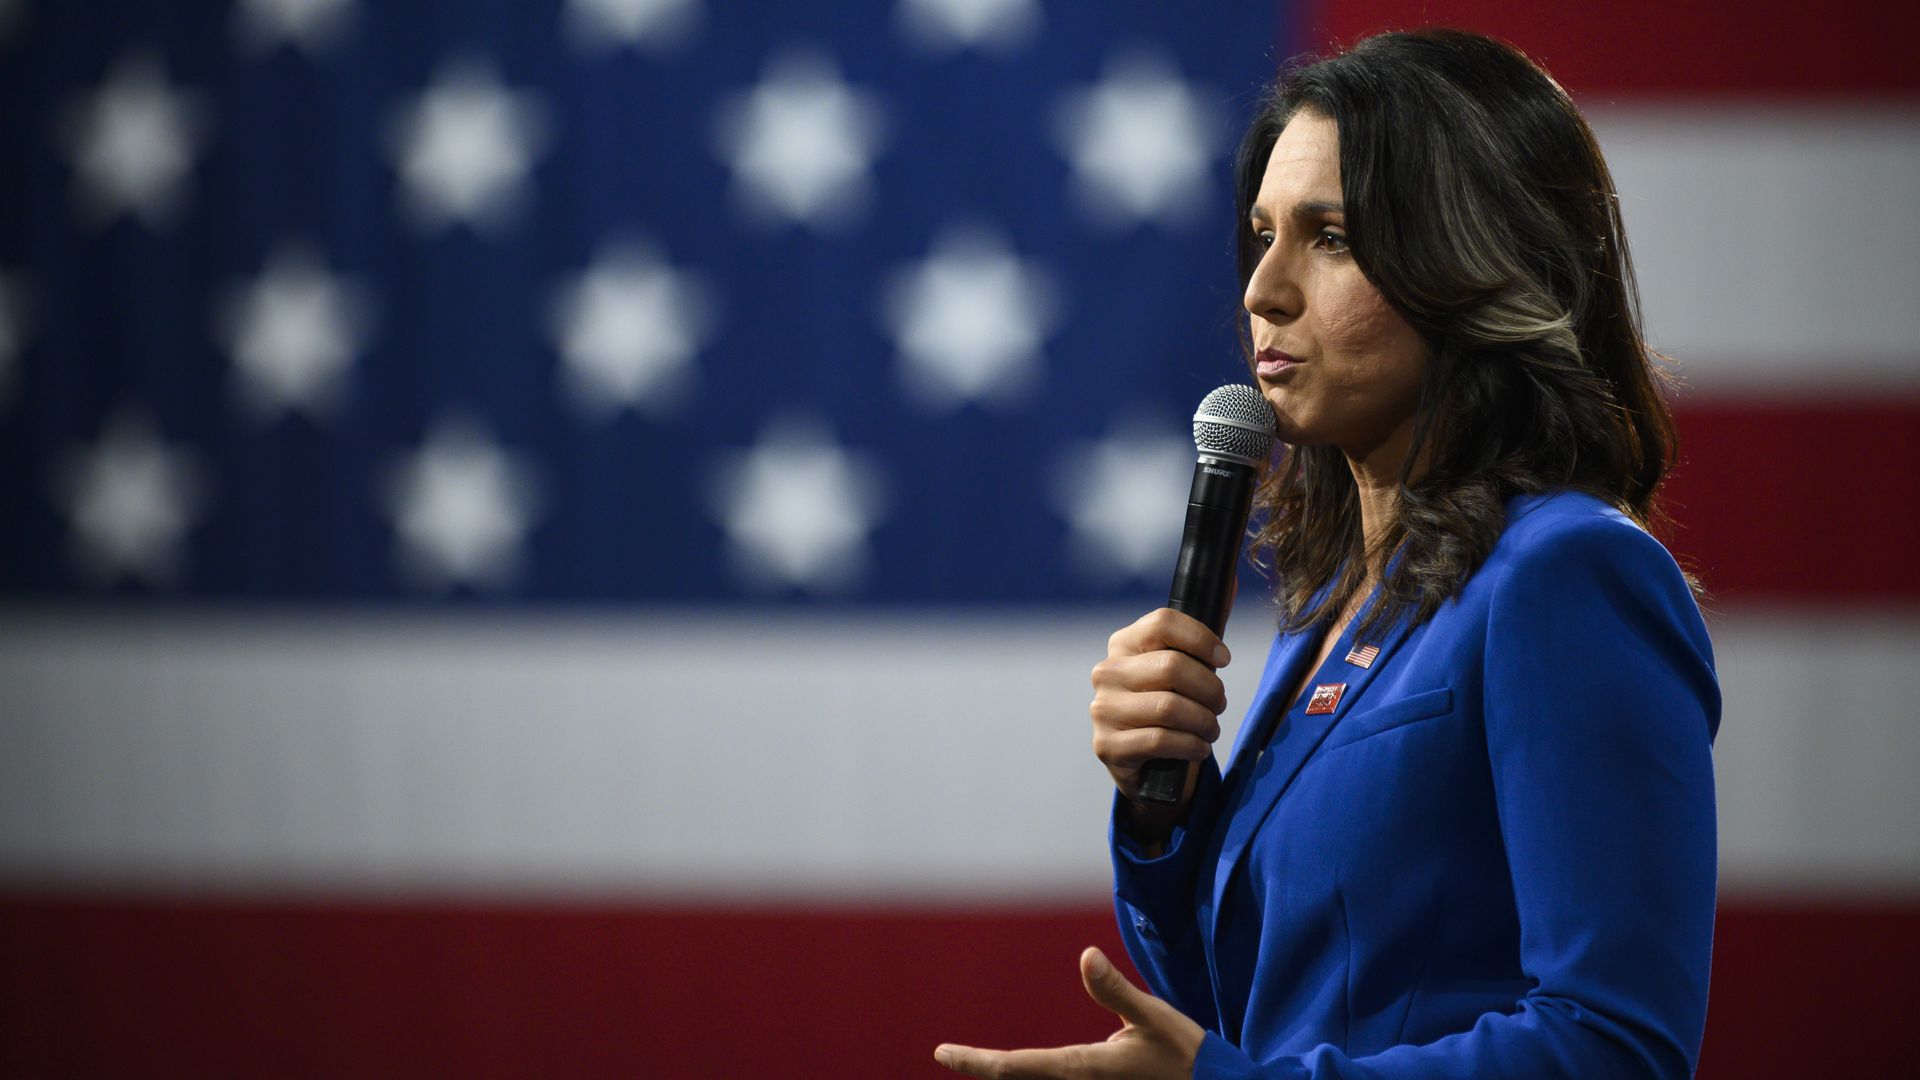  Democratic presidential candidate Rep. Tulsi Gabbard (D-HI) speaks during a forum on gun safety at the Iowa Events Center on August 10, 2019 in Des Moines, Iowa.